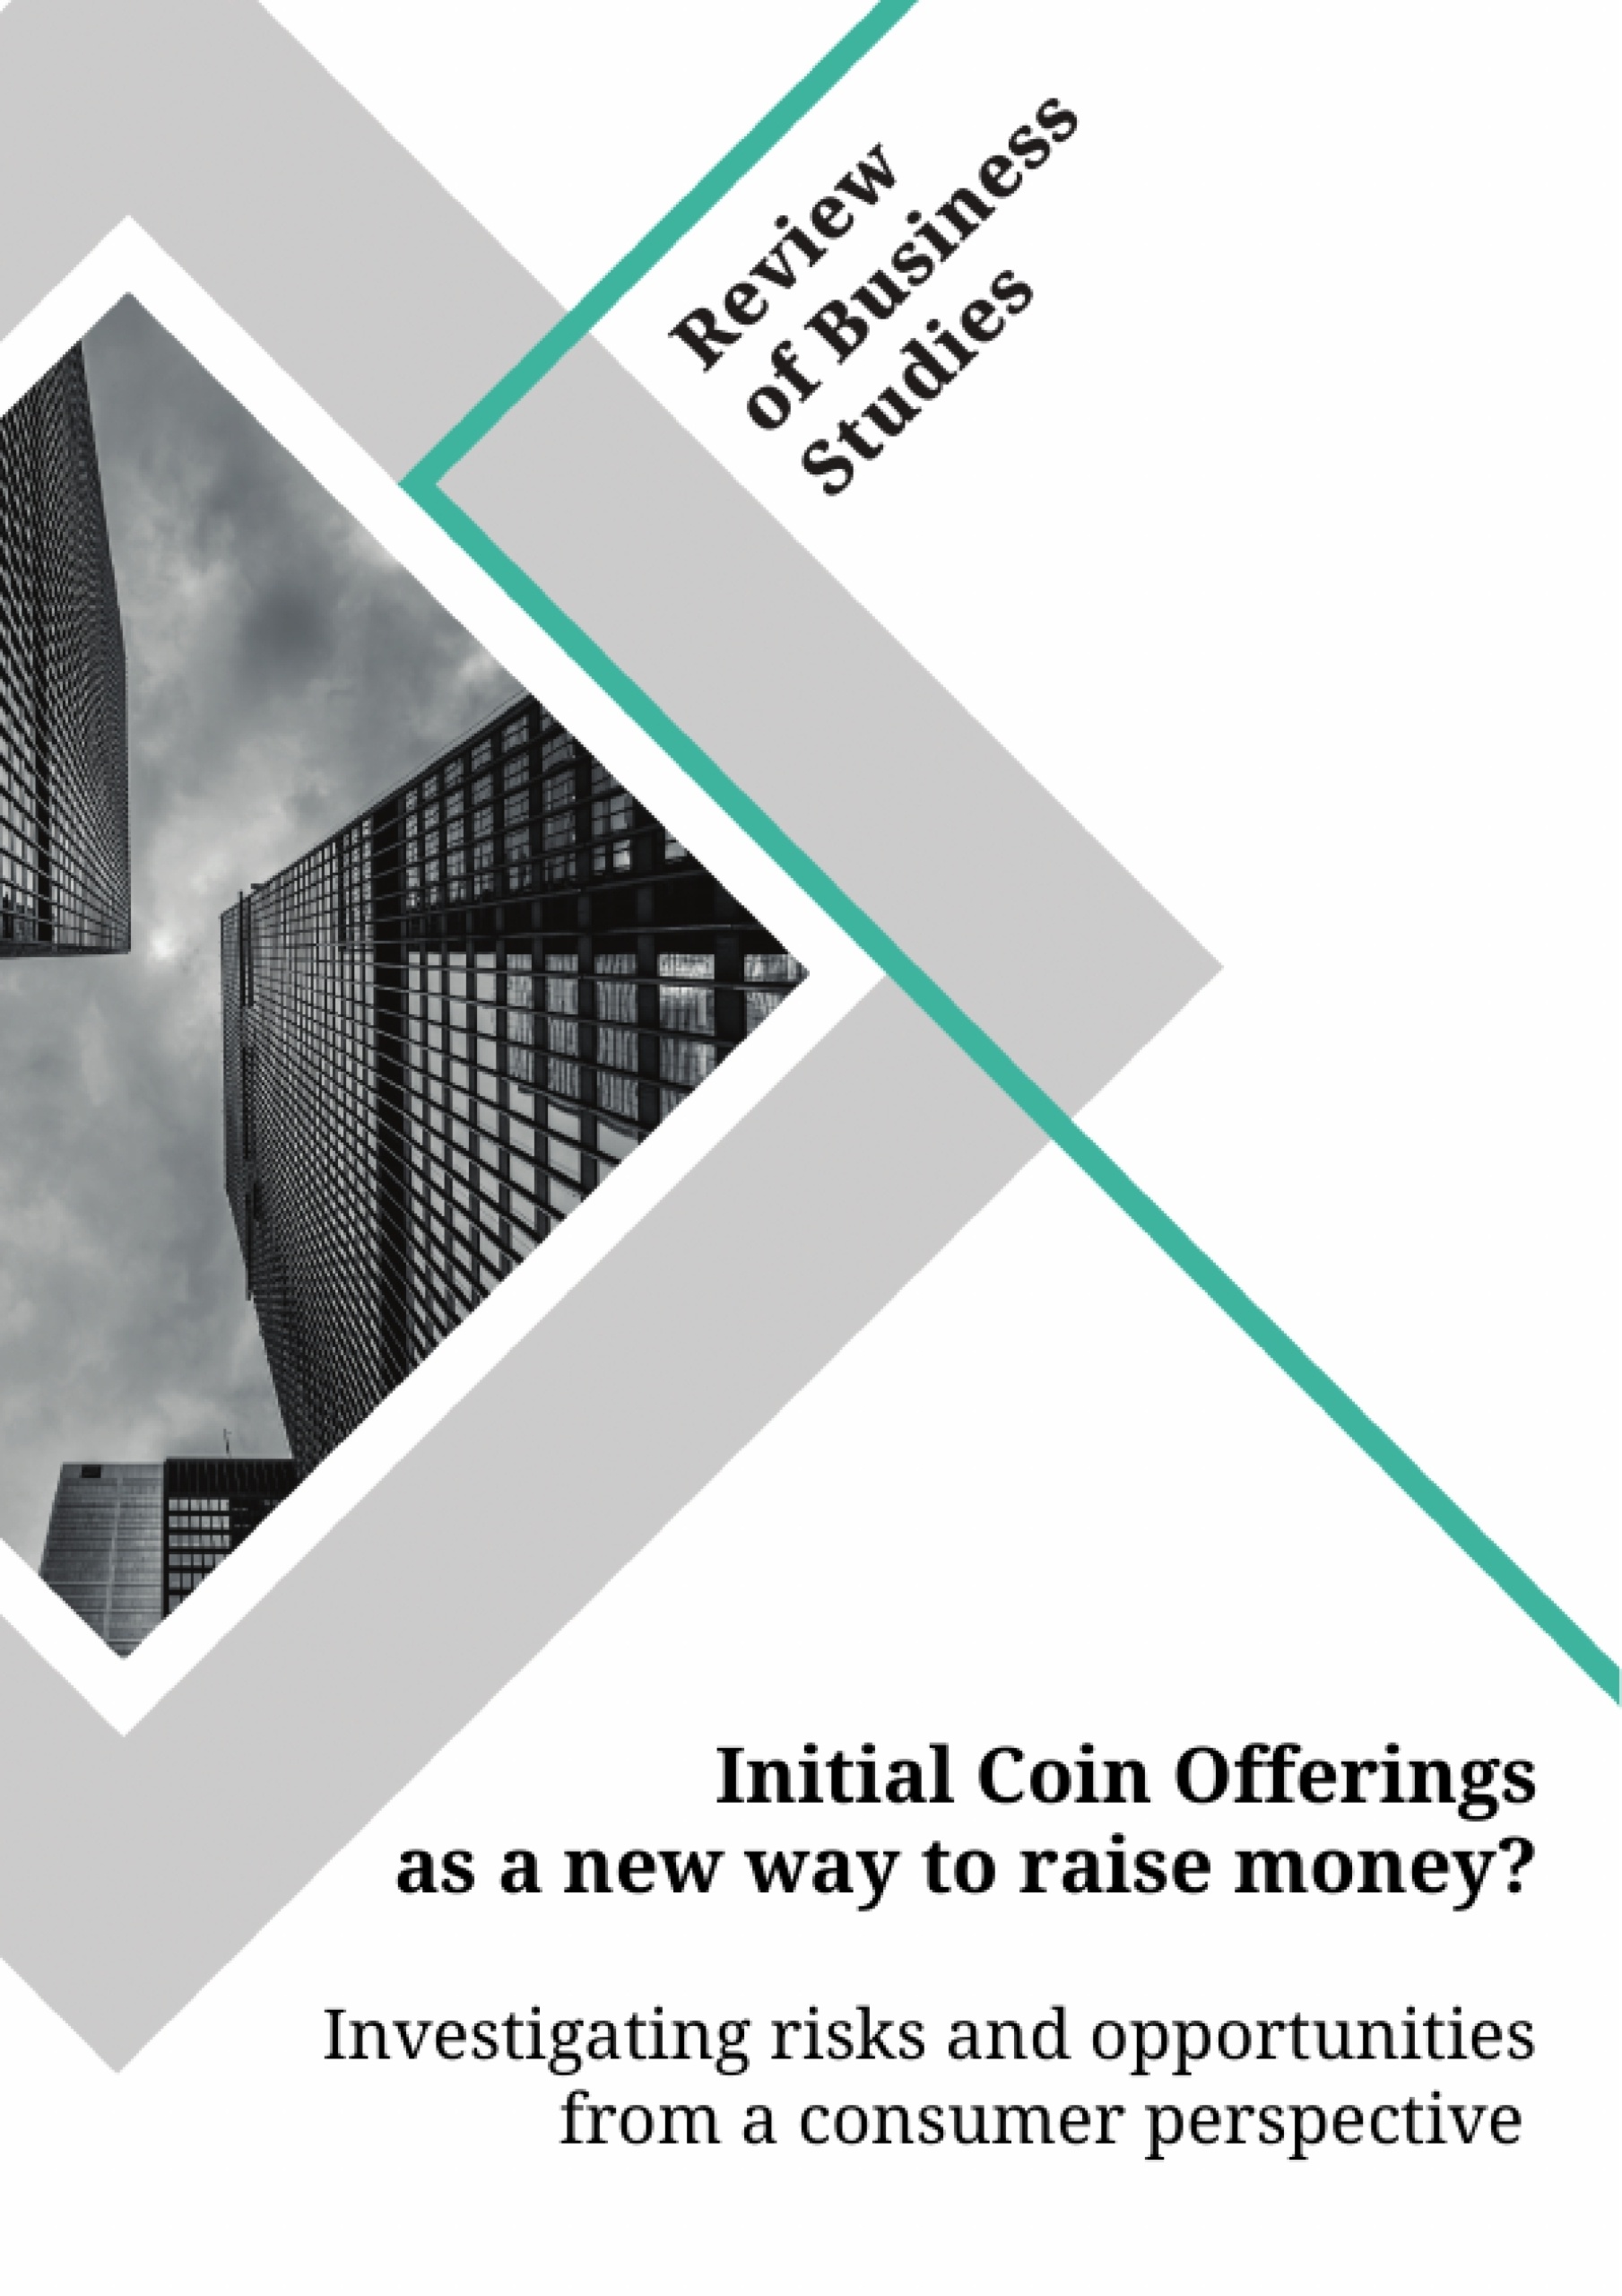 Title: Initial Coin Offerings as a new way to raise money? Investigating risks and opportunities from a consumer perspective